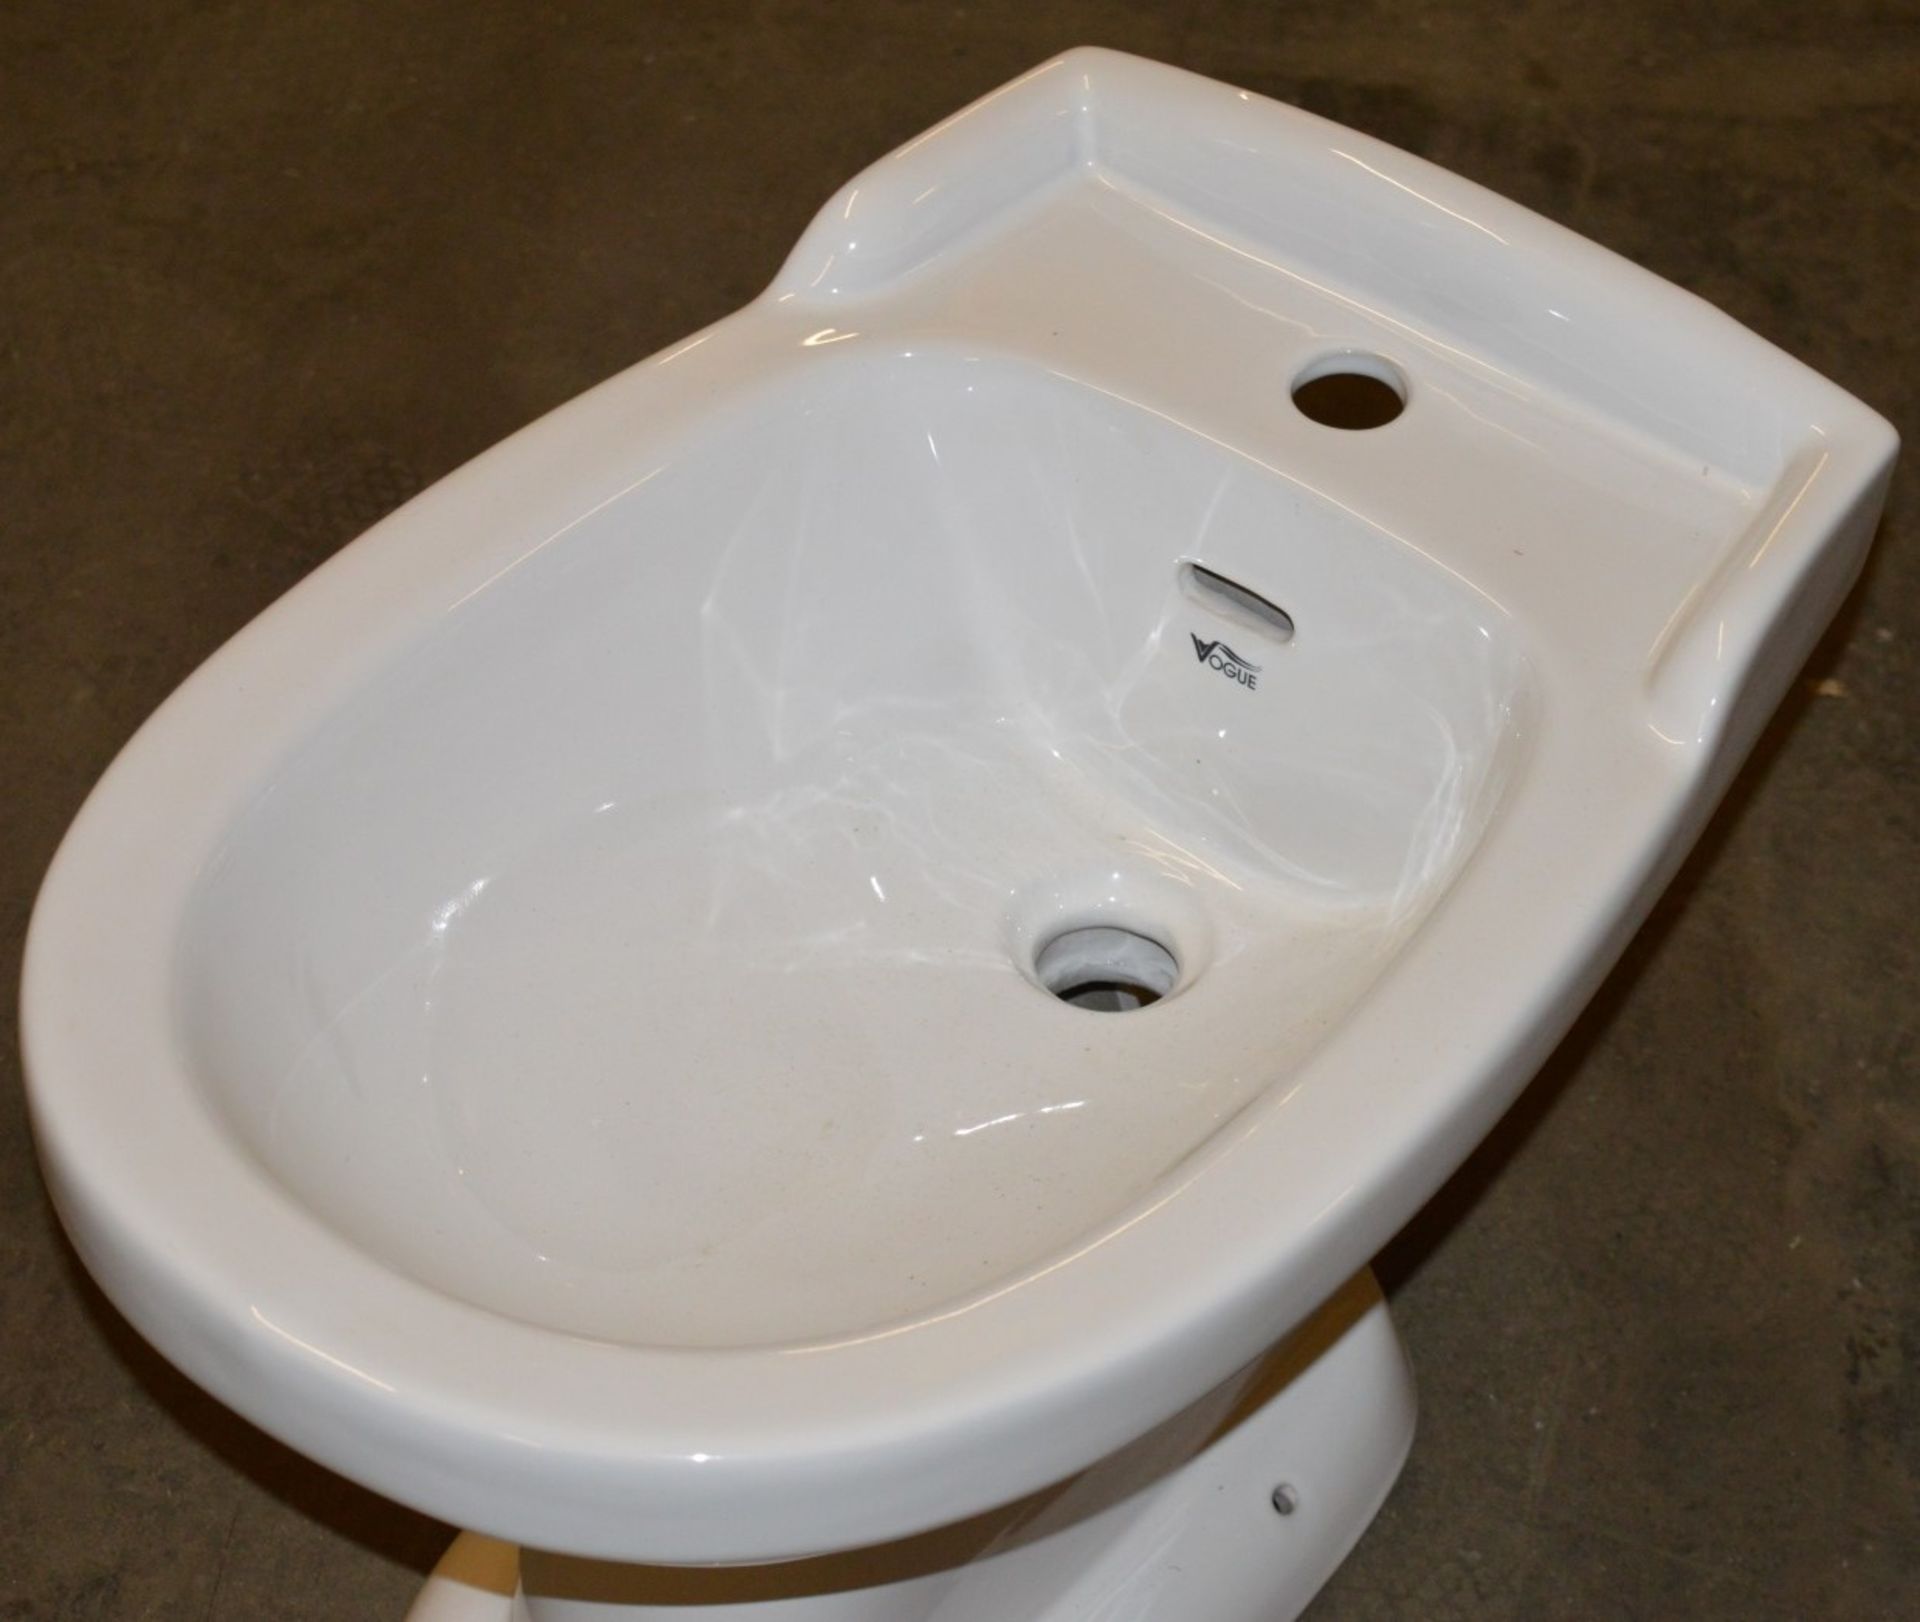 1 x Vogue Bathrooms HEYWOOD Single Tap Hole BIDET - Brand New and Boxed - High Quality White Ceramic - Image 2 of 3